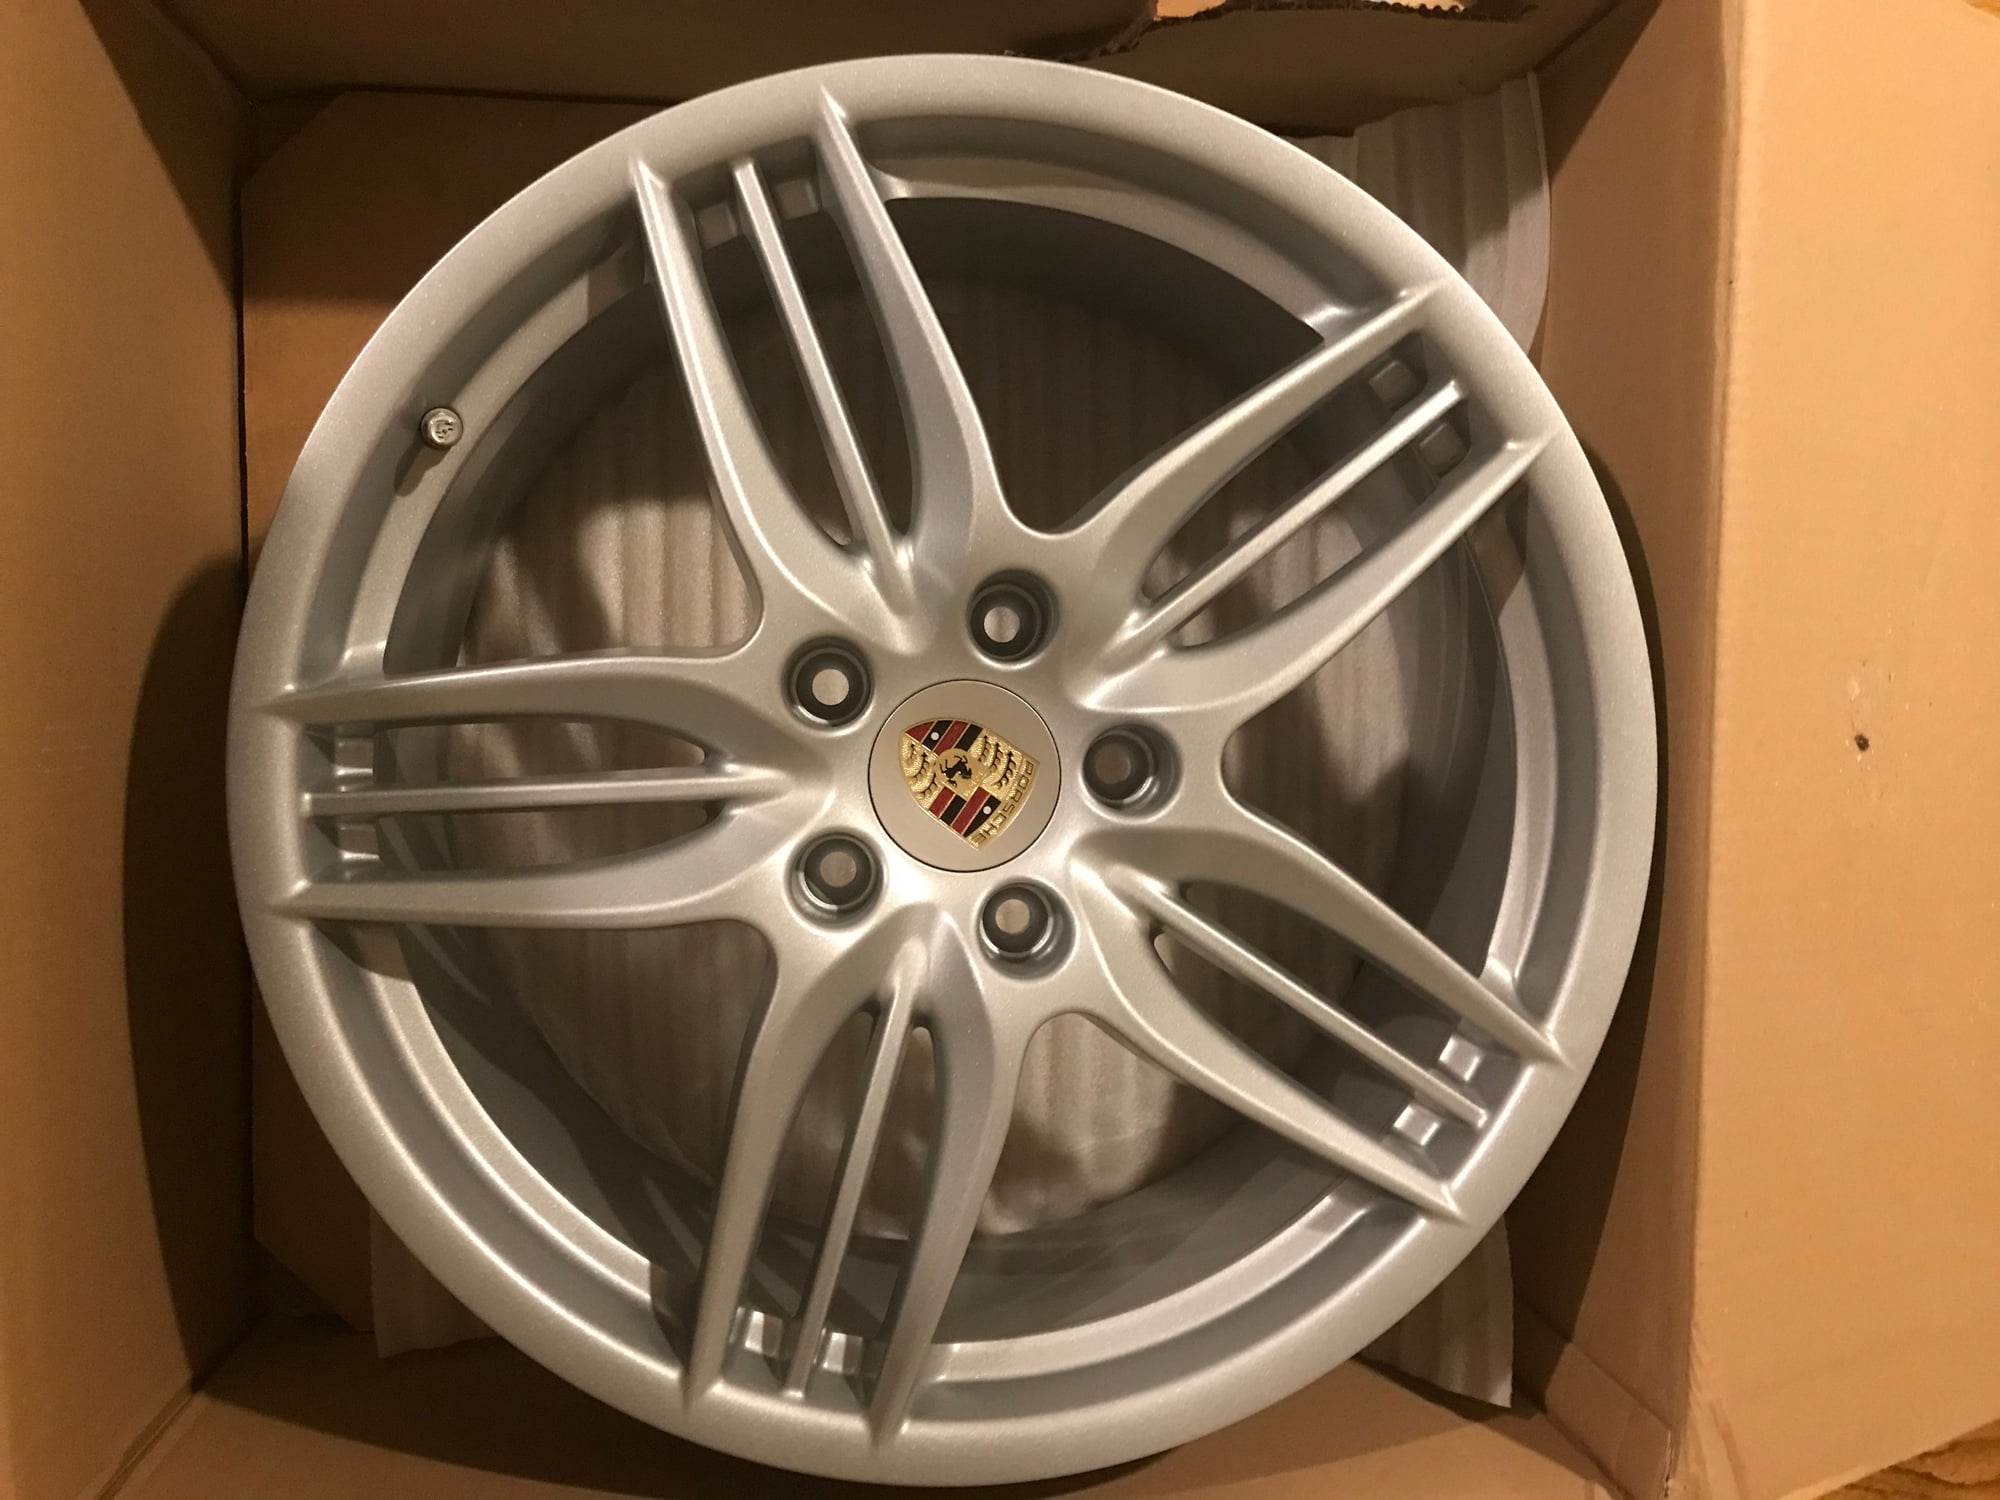 Wheels and Tires/Axles - Newly refinished 991 Sport Design II wheels - Used - 2013 to 2016 Porsche 911 - Minneapolis, MN 55416, United States